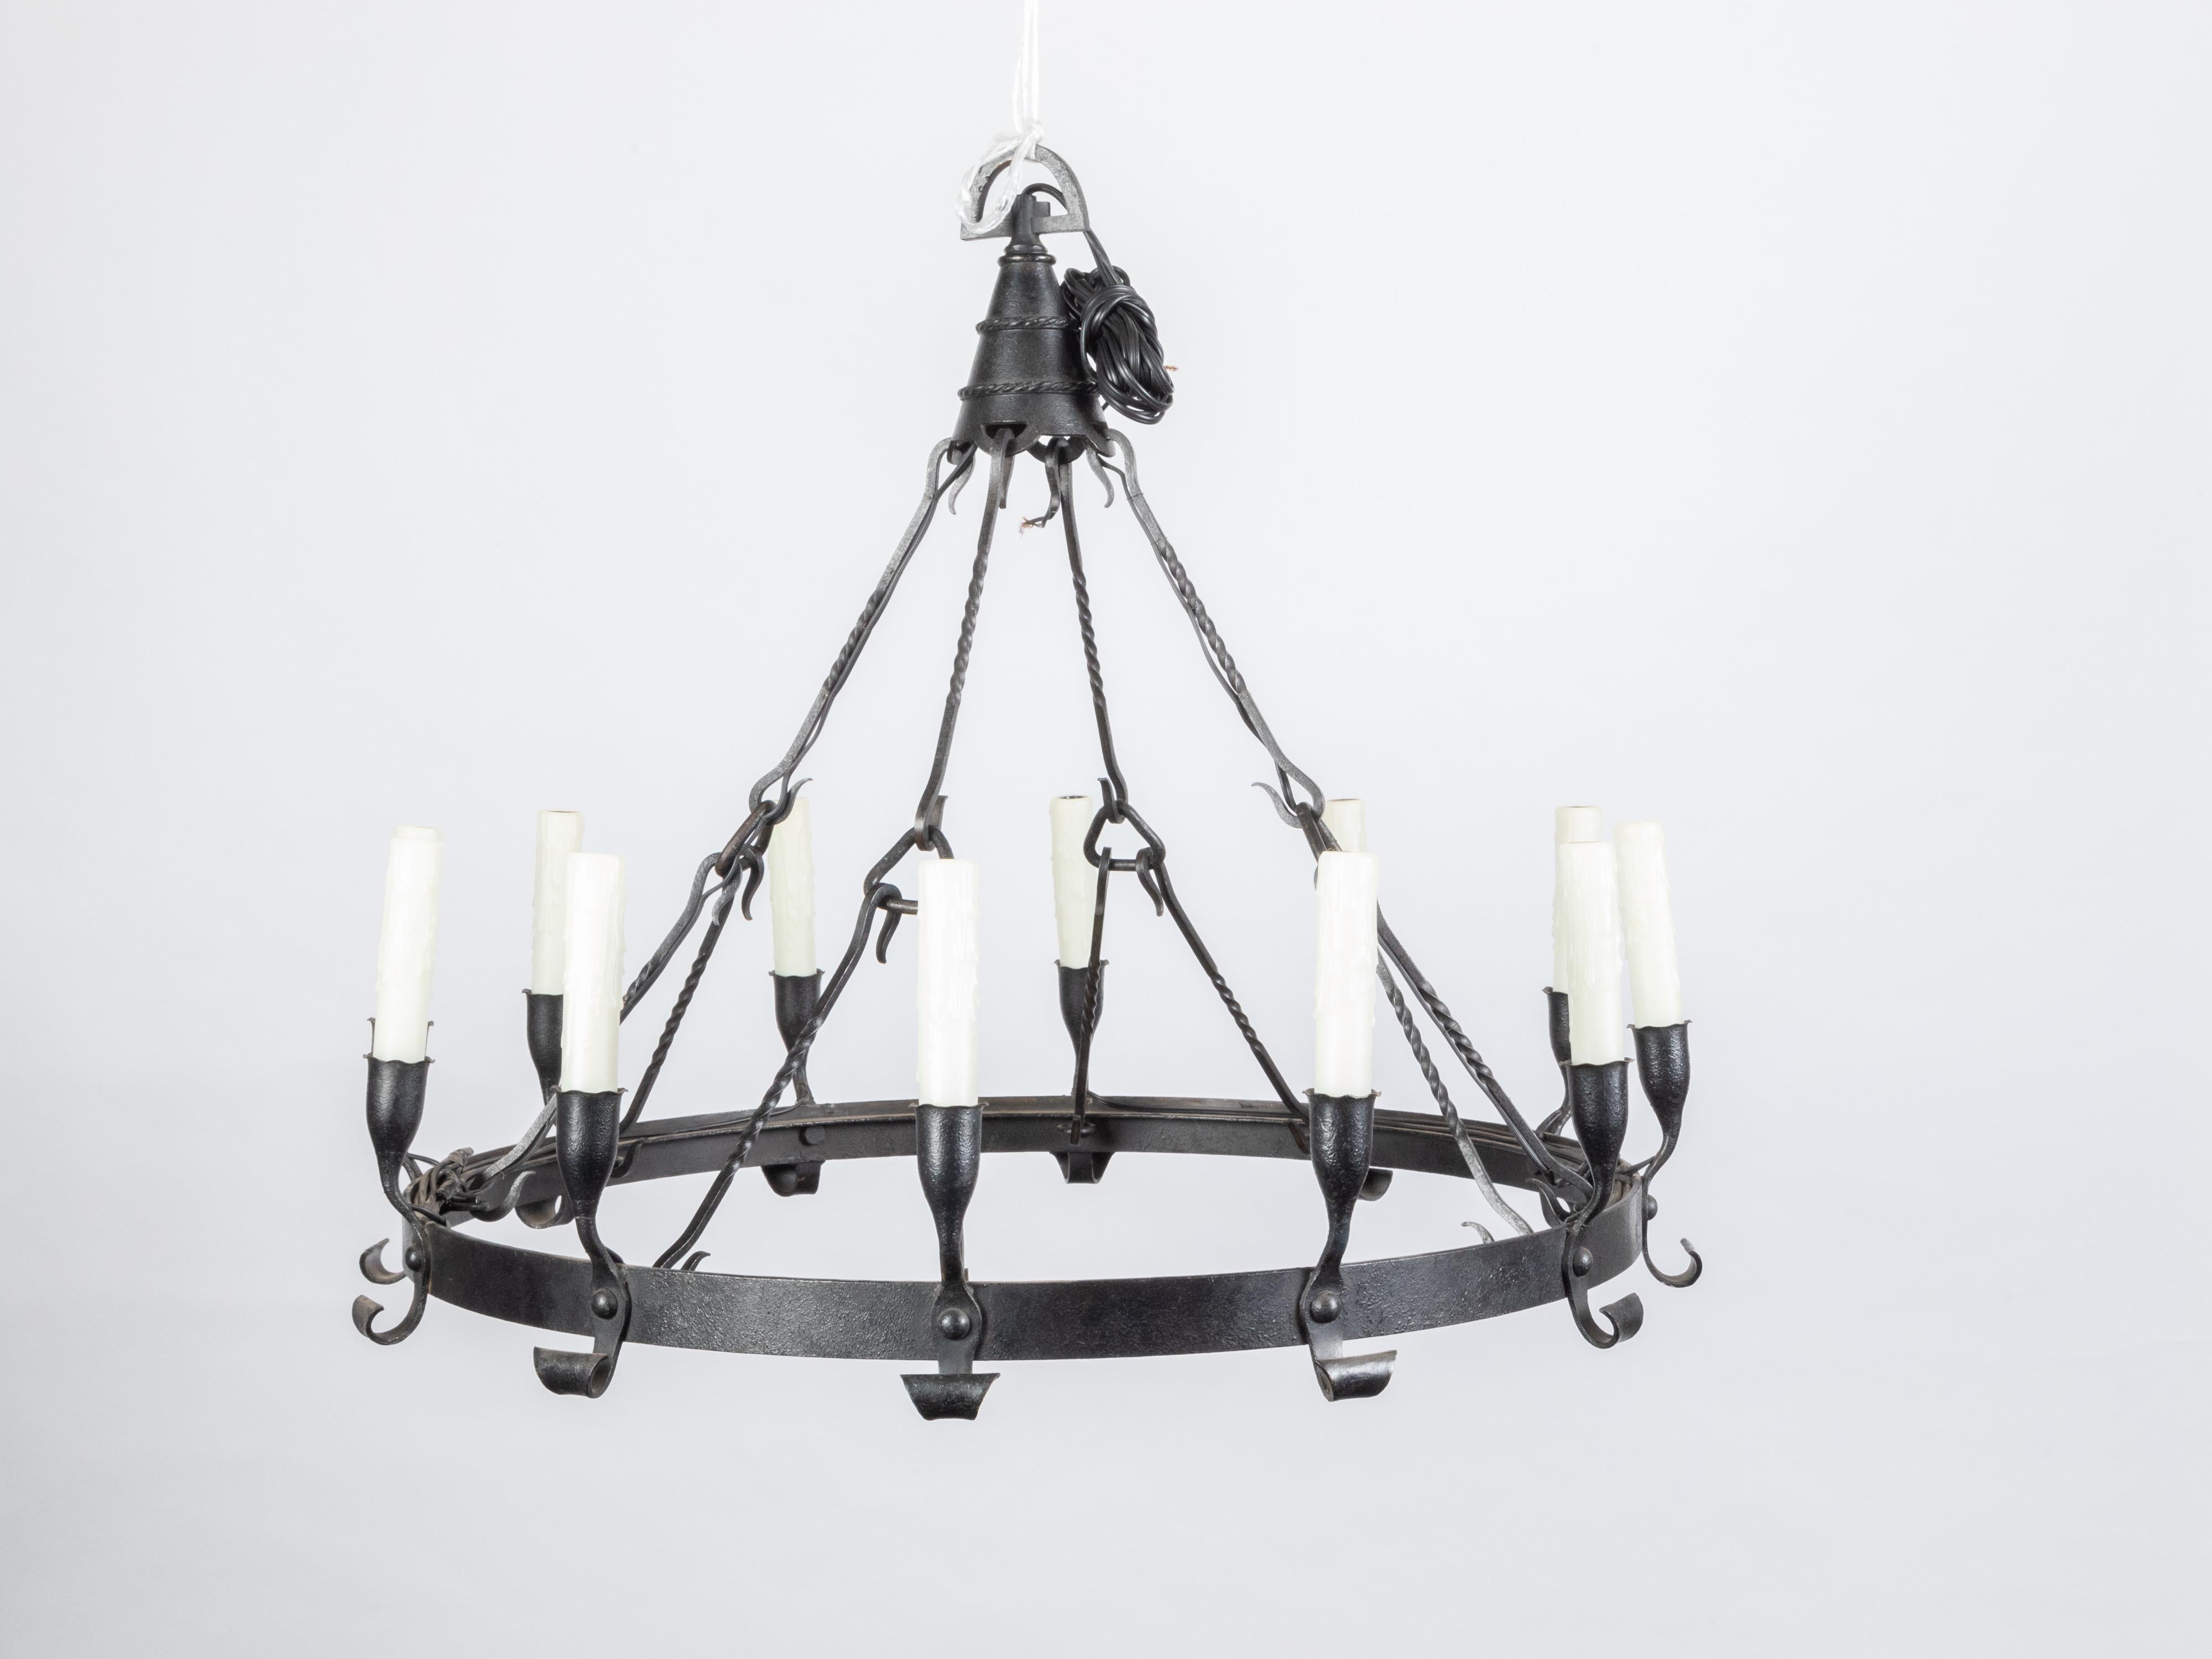 A Spanish Colonial iron chandelier from the early 20th century, with 12 arms and central ring. Created in the early years of the 20th century, this Spanish Colonial chandelier features an iron ring supporting 12 arms with scrolling accents in the